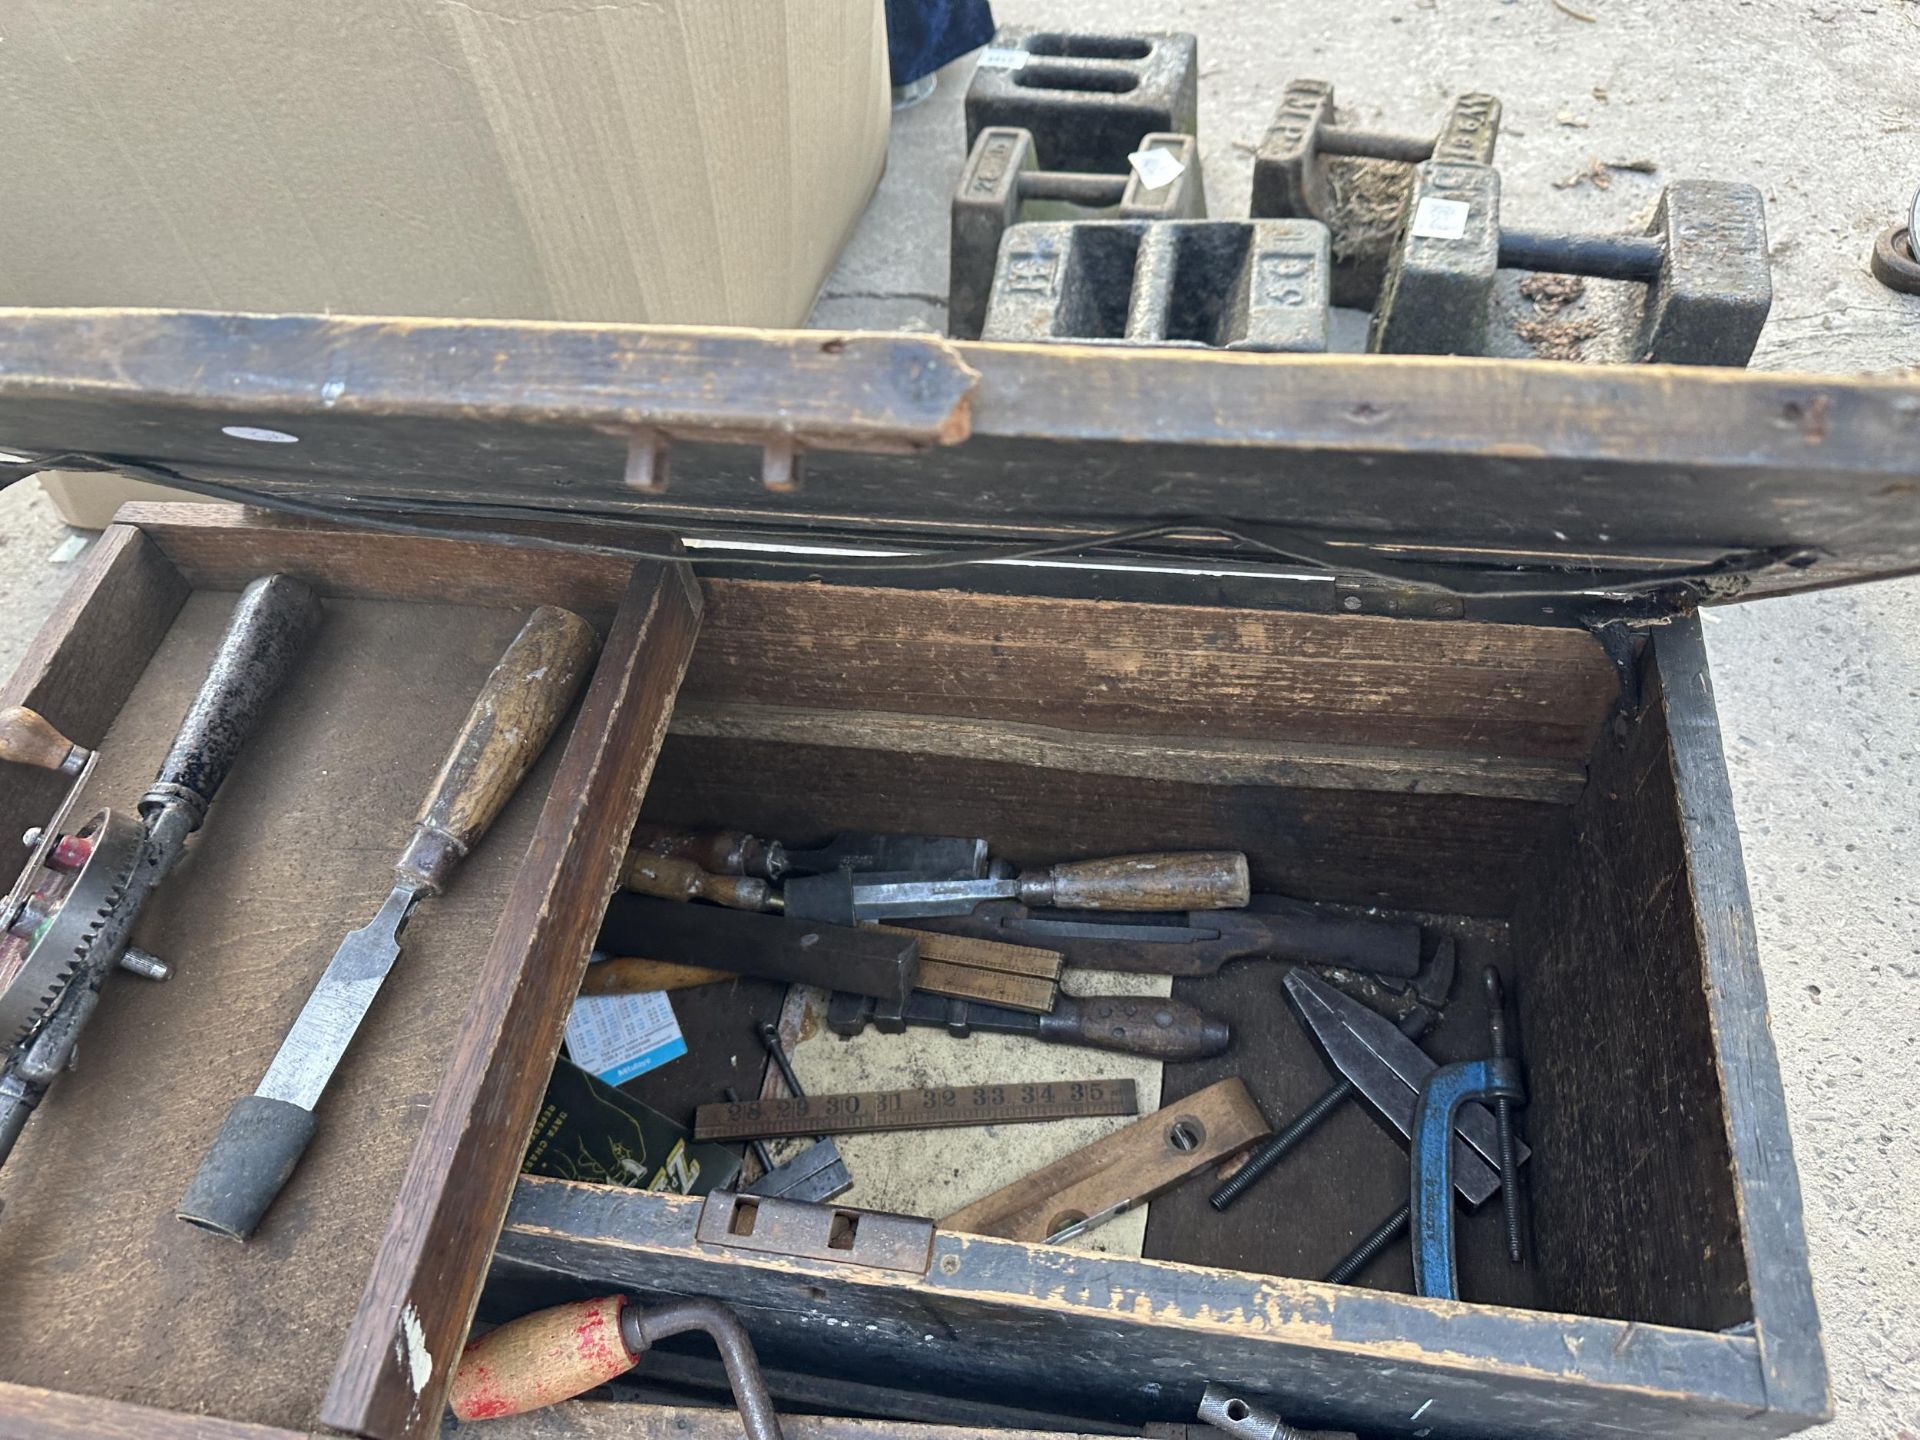 TWO VINTAGE WOODEN TOOL CHESTS WITH AN ASSORTMENT OF TOOLS TO INCLUDE CLAMPS, CHISELS AND BRACE - Image 2 of 3